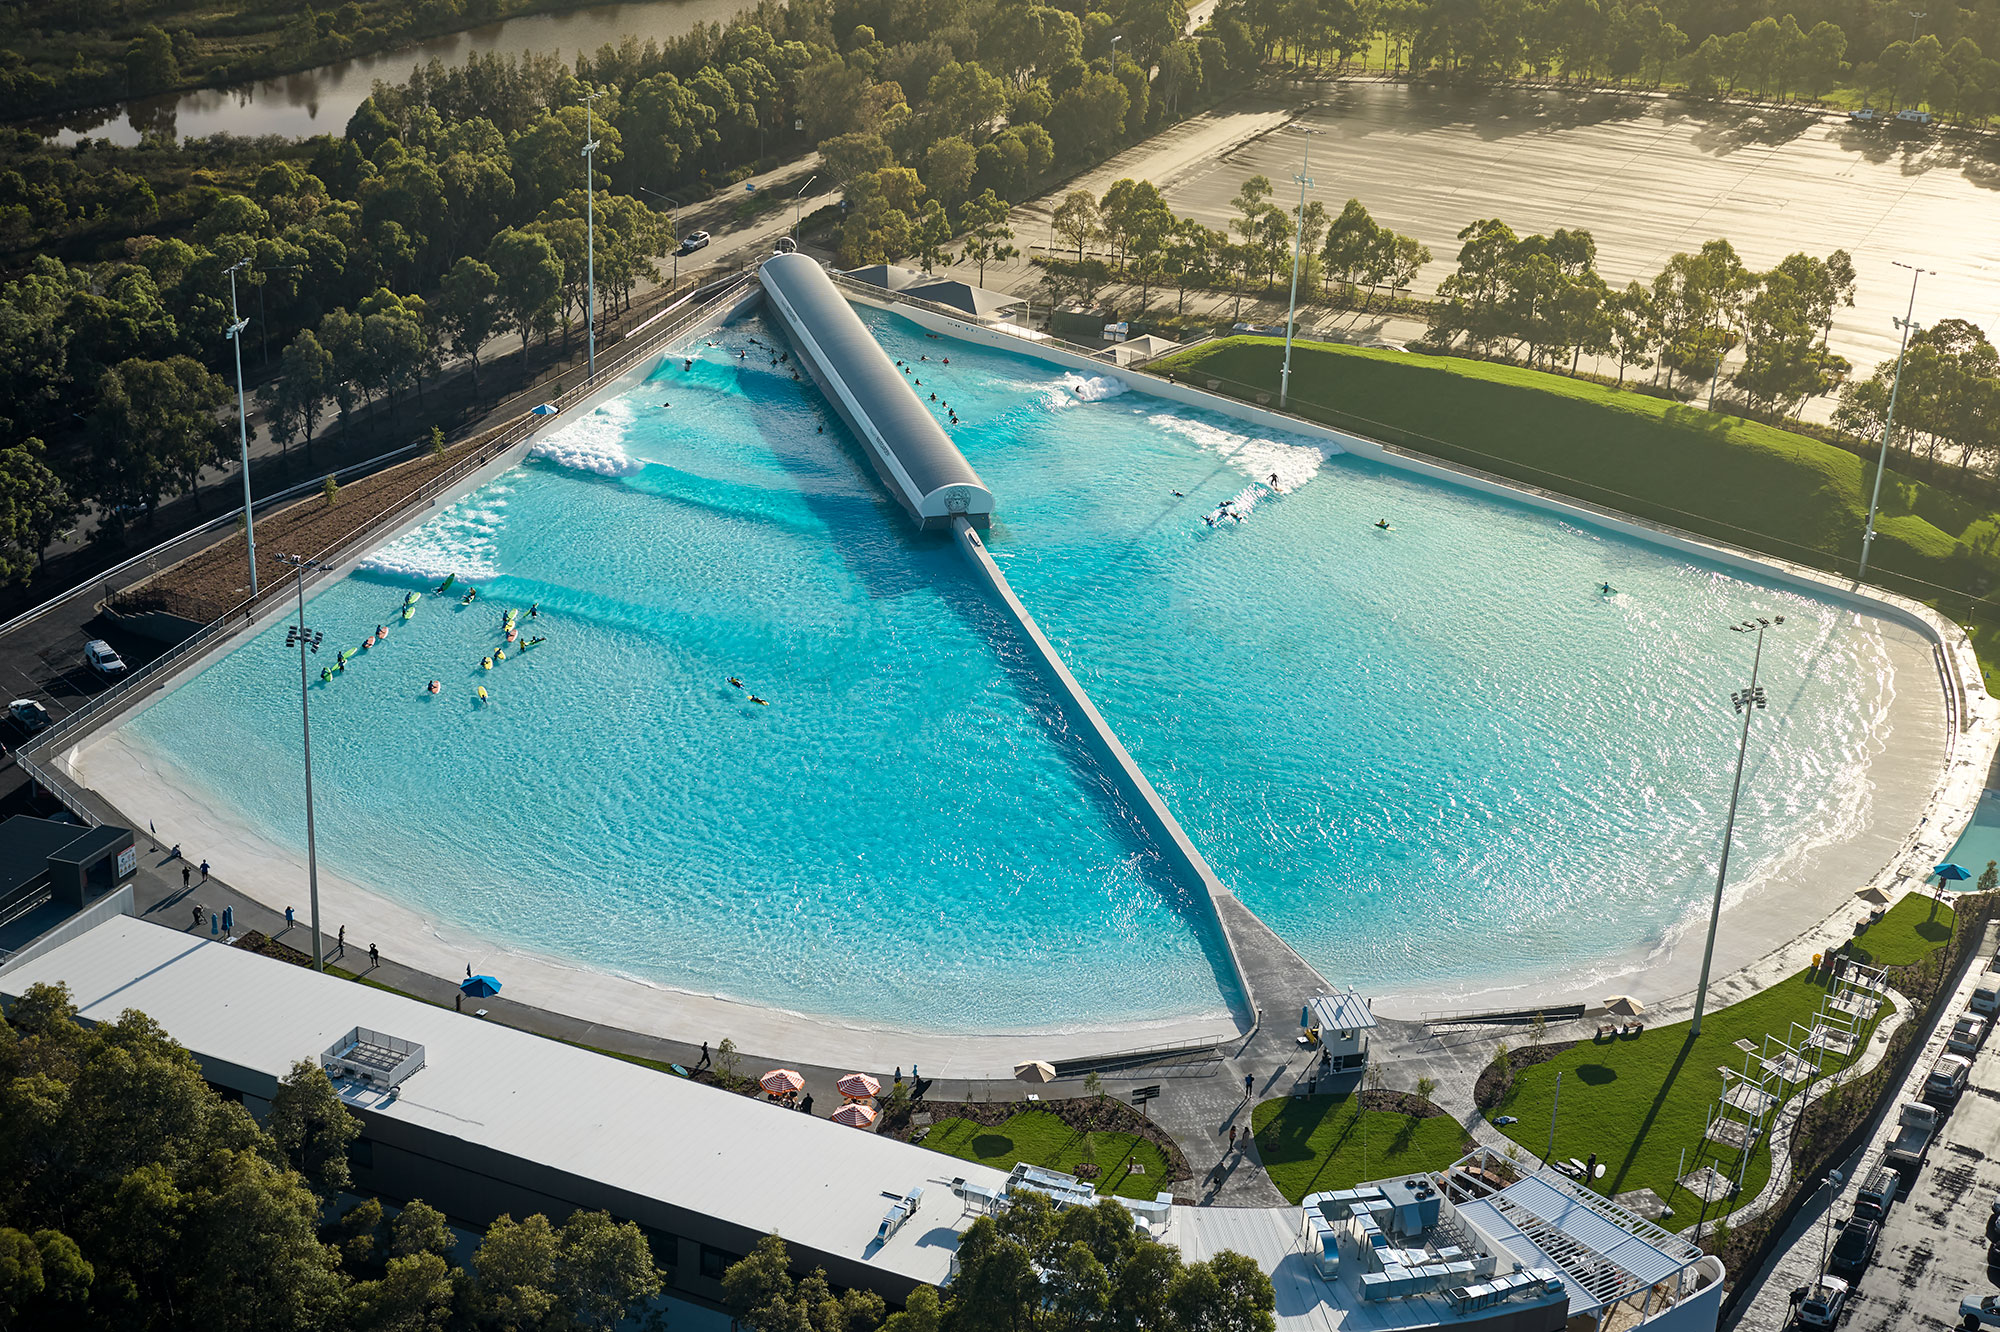 It's really here, URBNSURF Sydney opens today